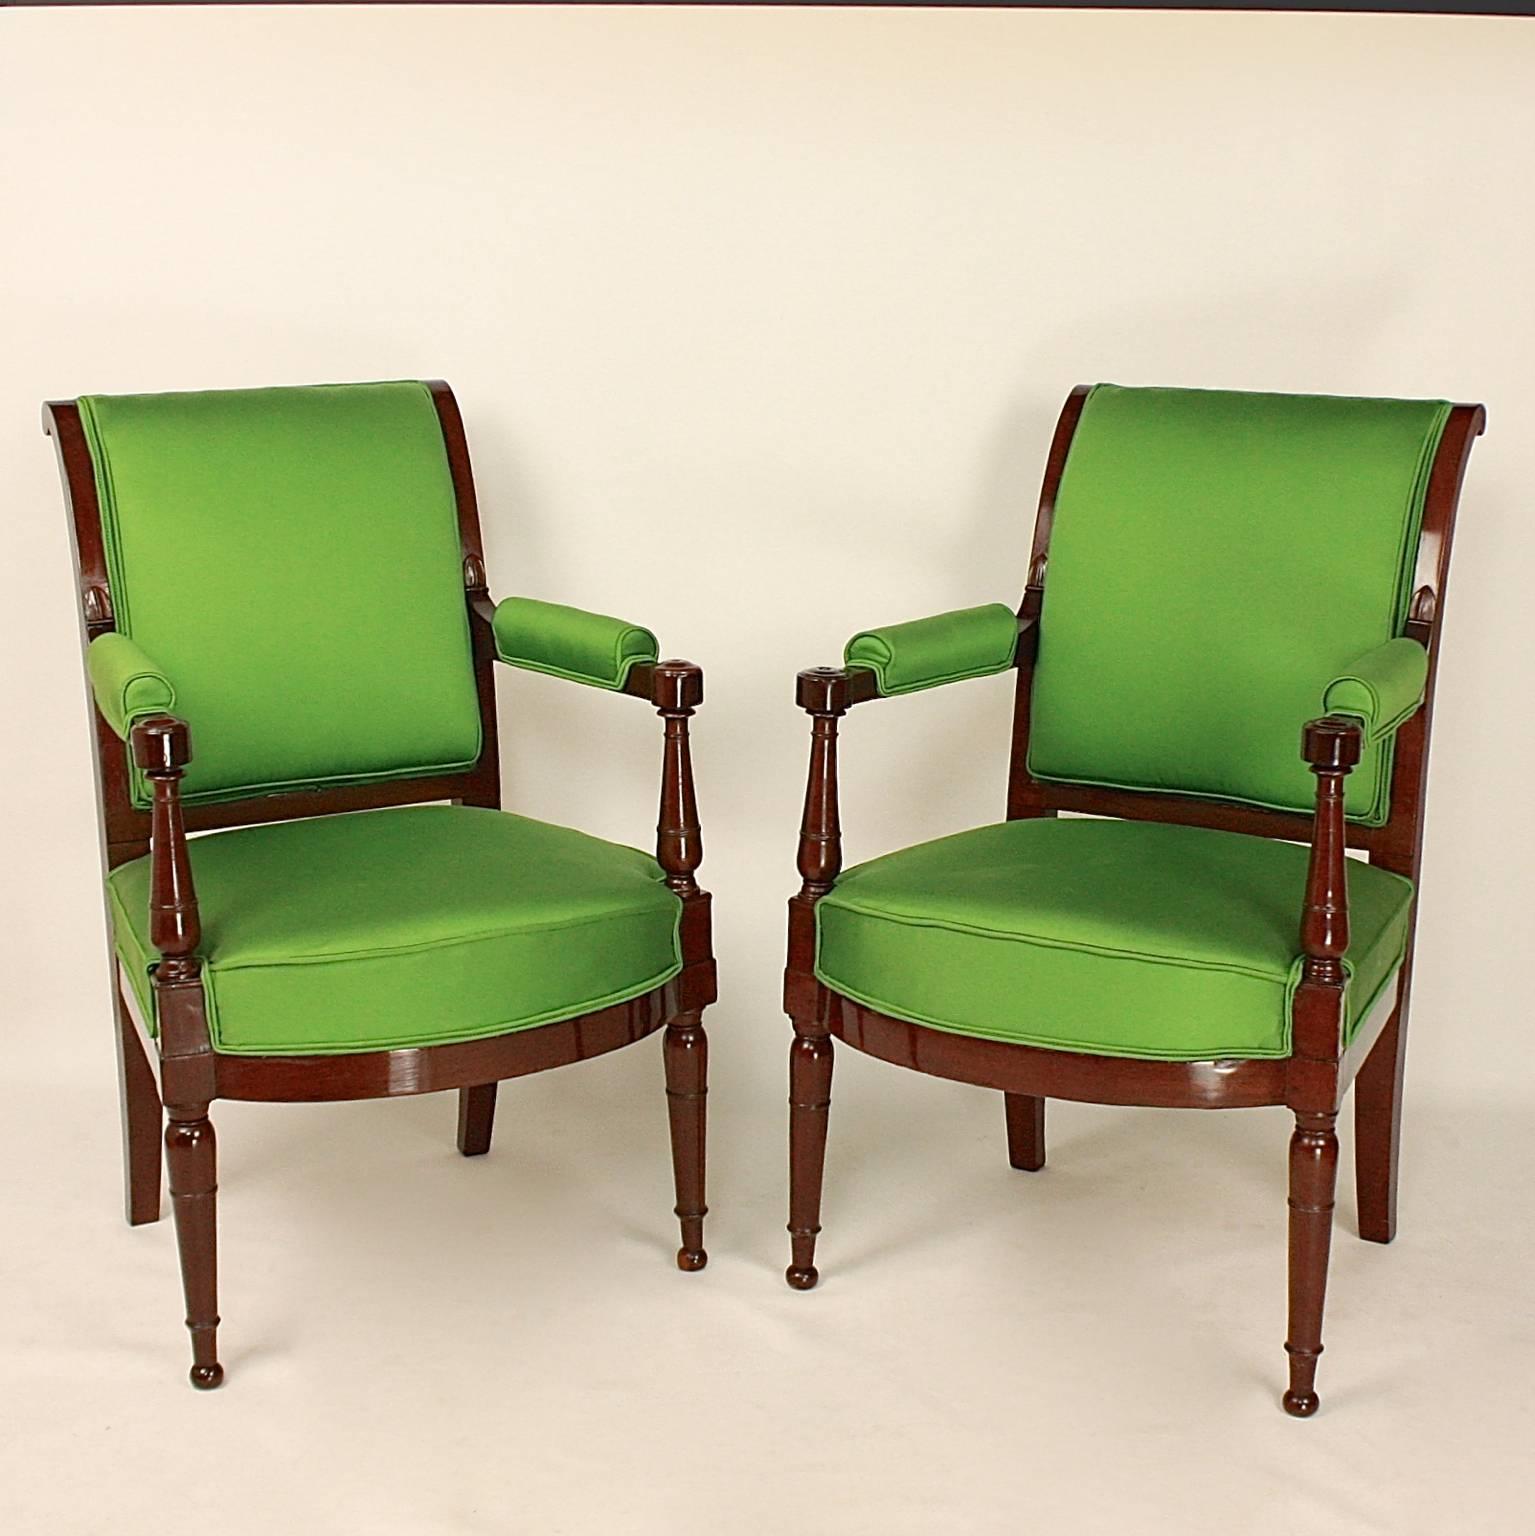 A set of four Mahogany armchairs or Fauteuils, in the manner of Henri Jacob (1753-1824, maitre 1779), with a rectangular plat back, its top wrapped, with flat armrests with rosettes supported by balustrades that are connected with the tapering